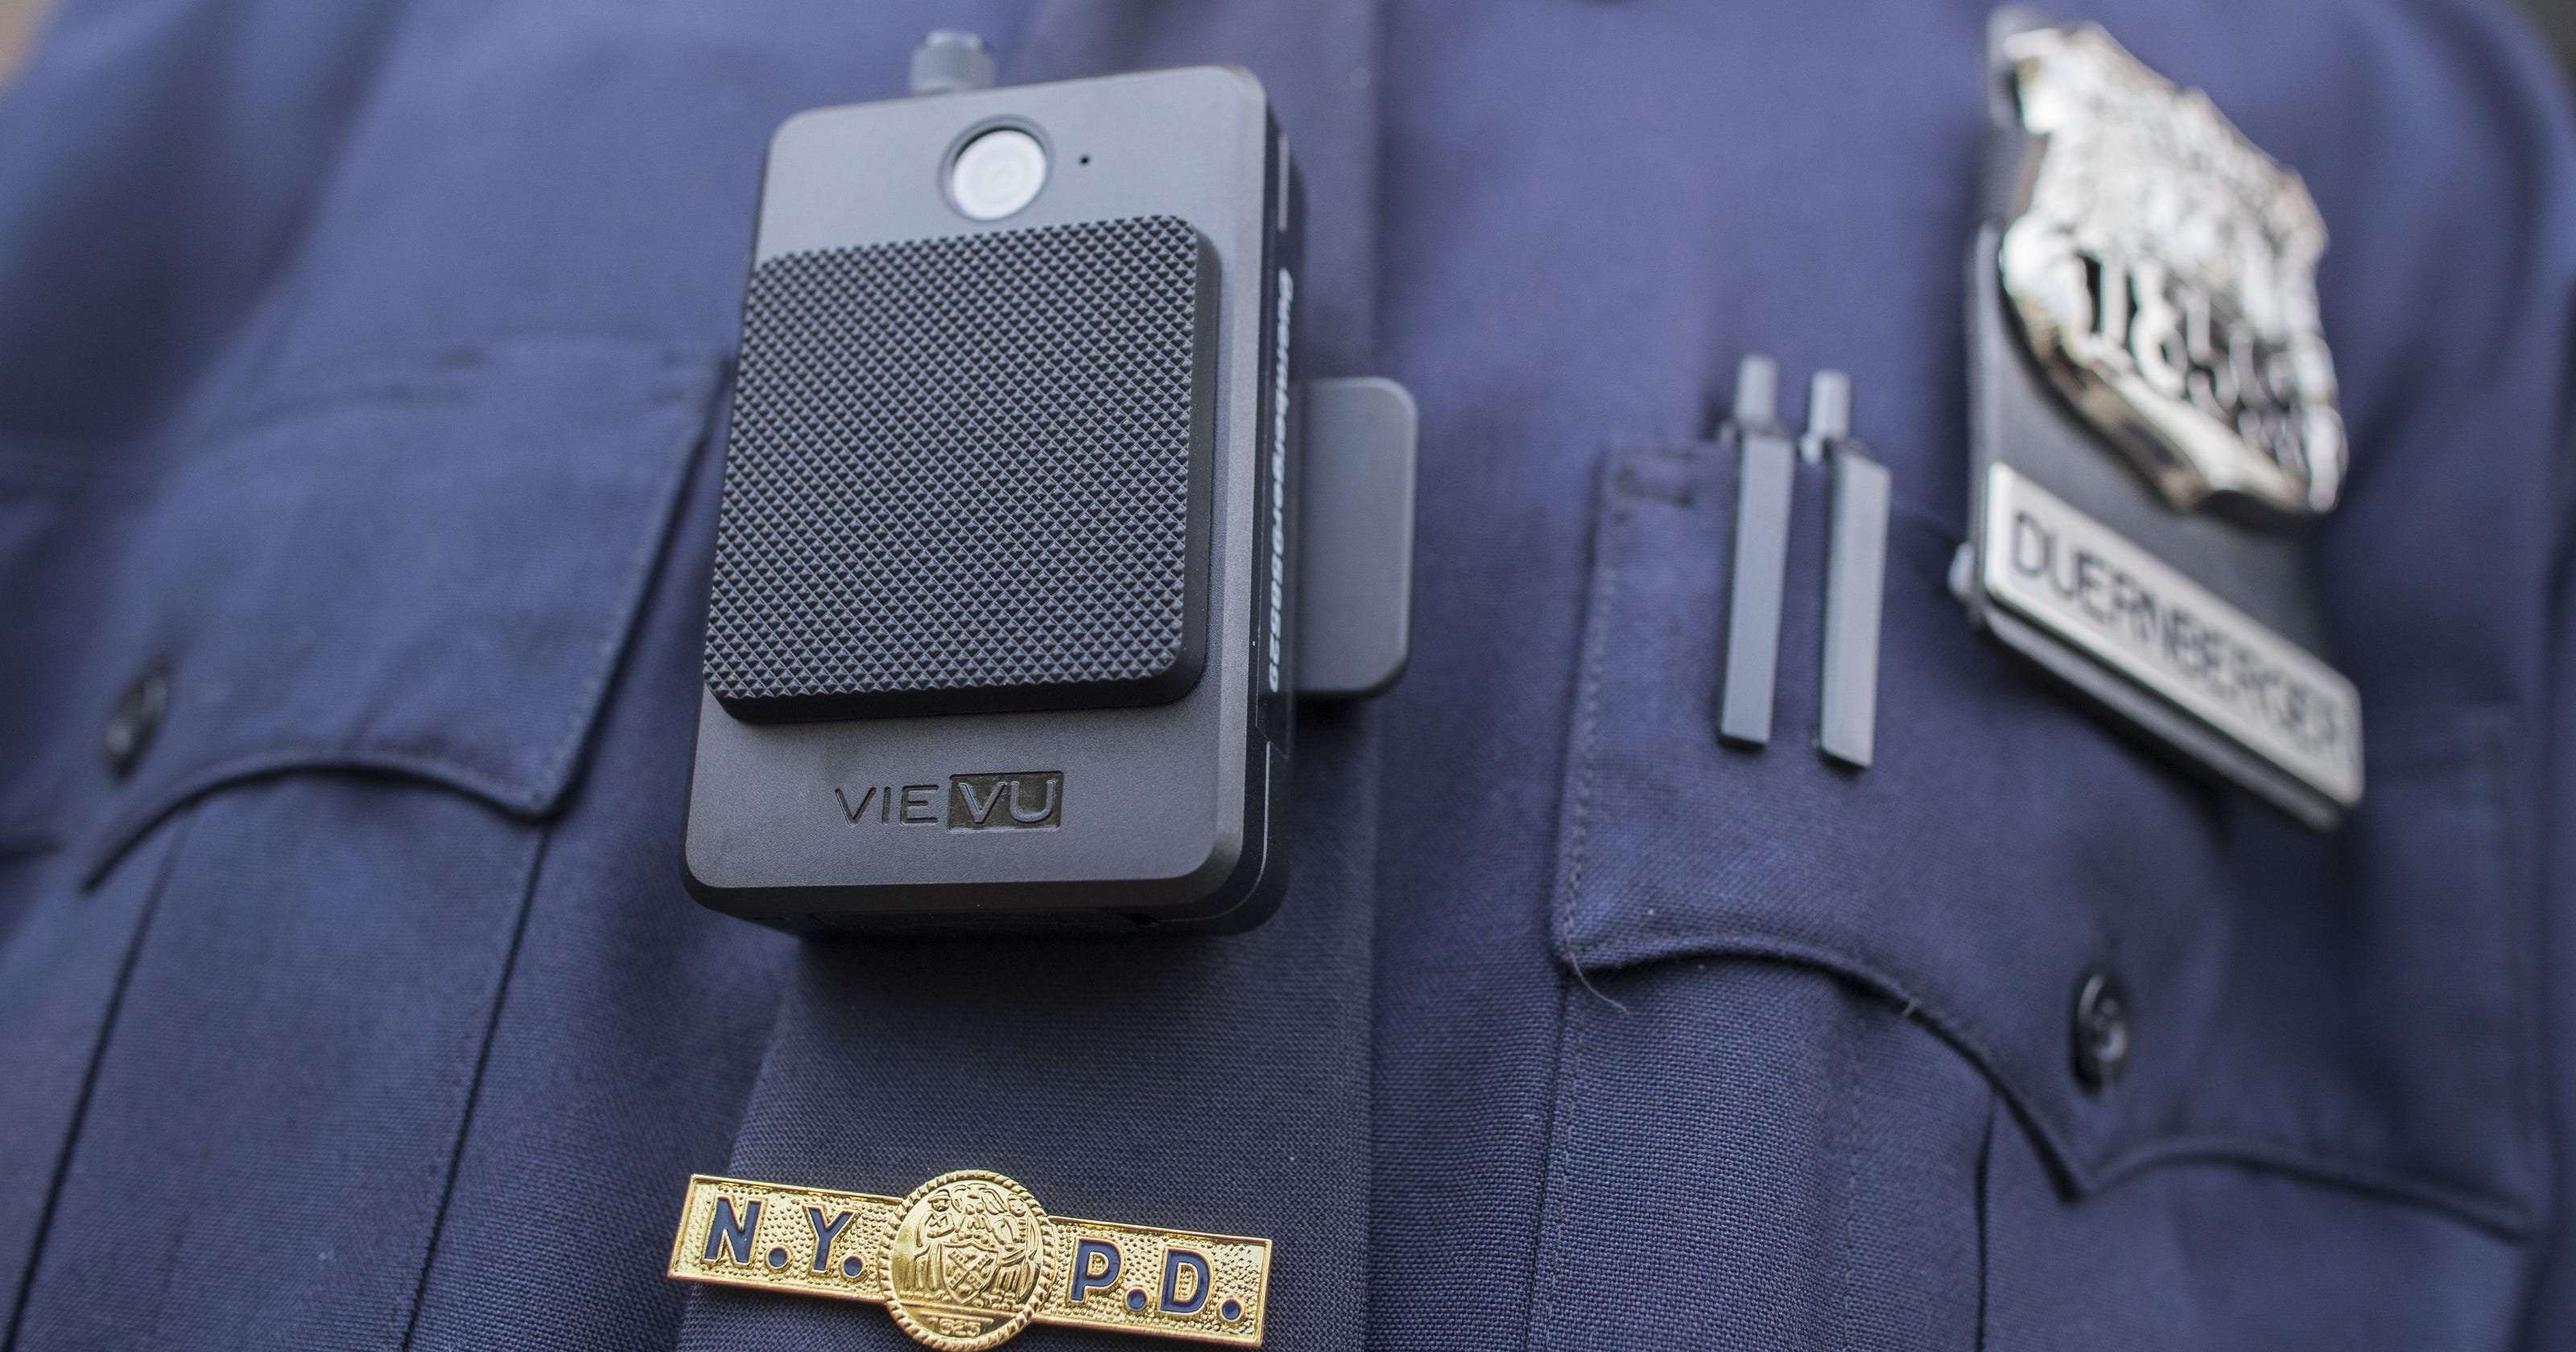 image for Las Vegas police to charge $280 per hour for body cam footage